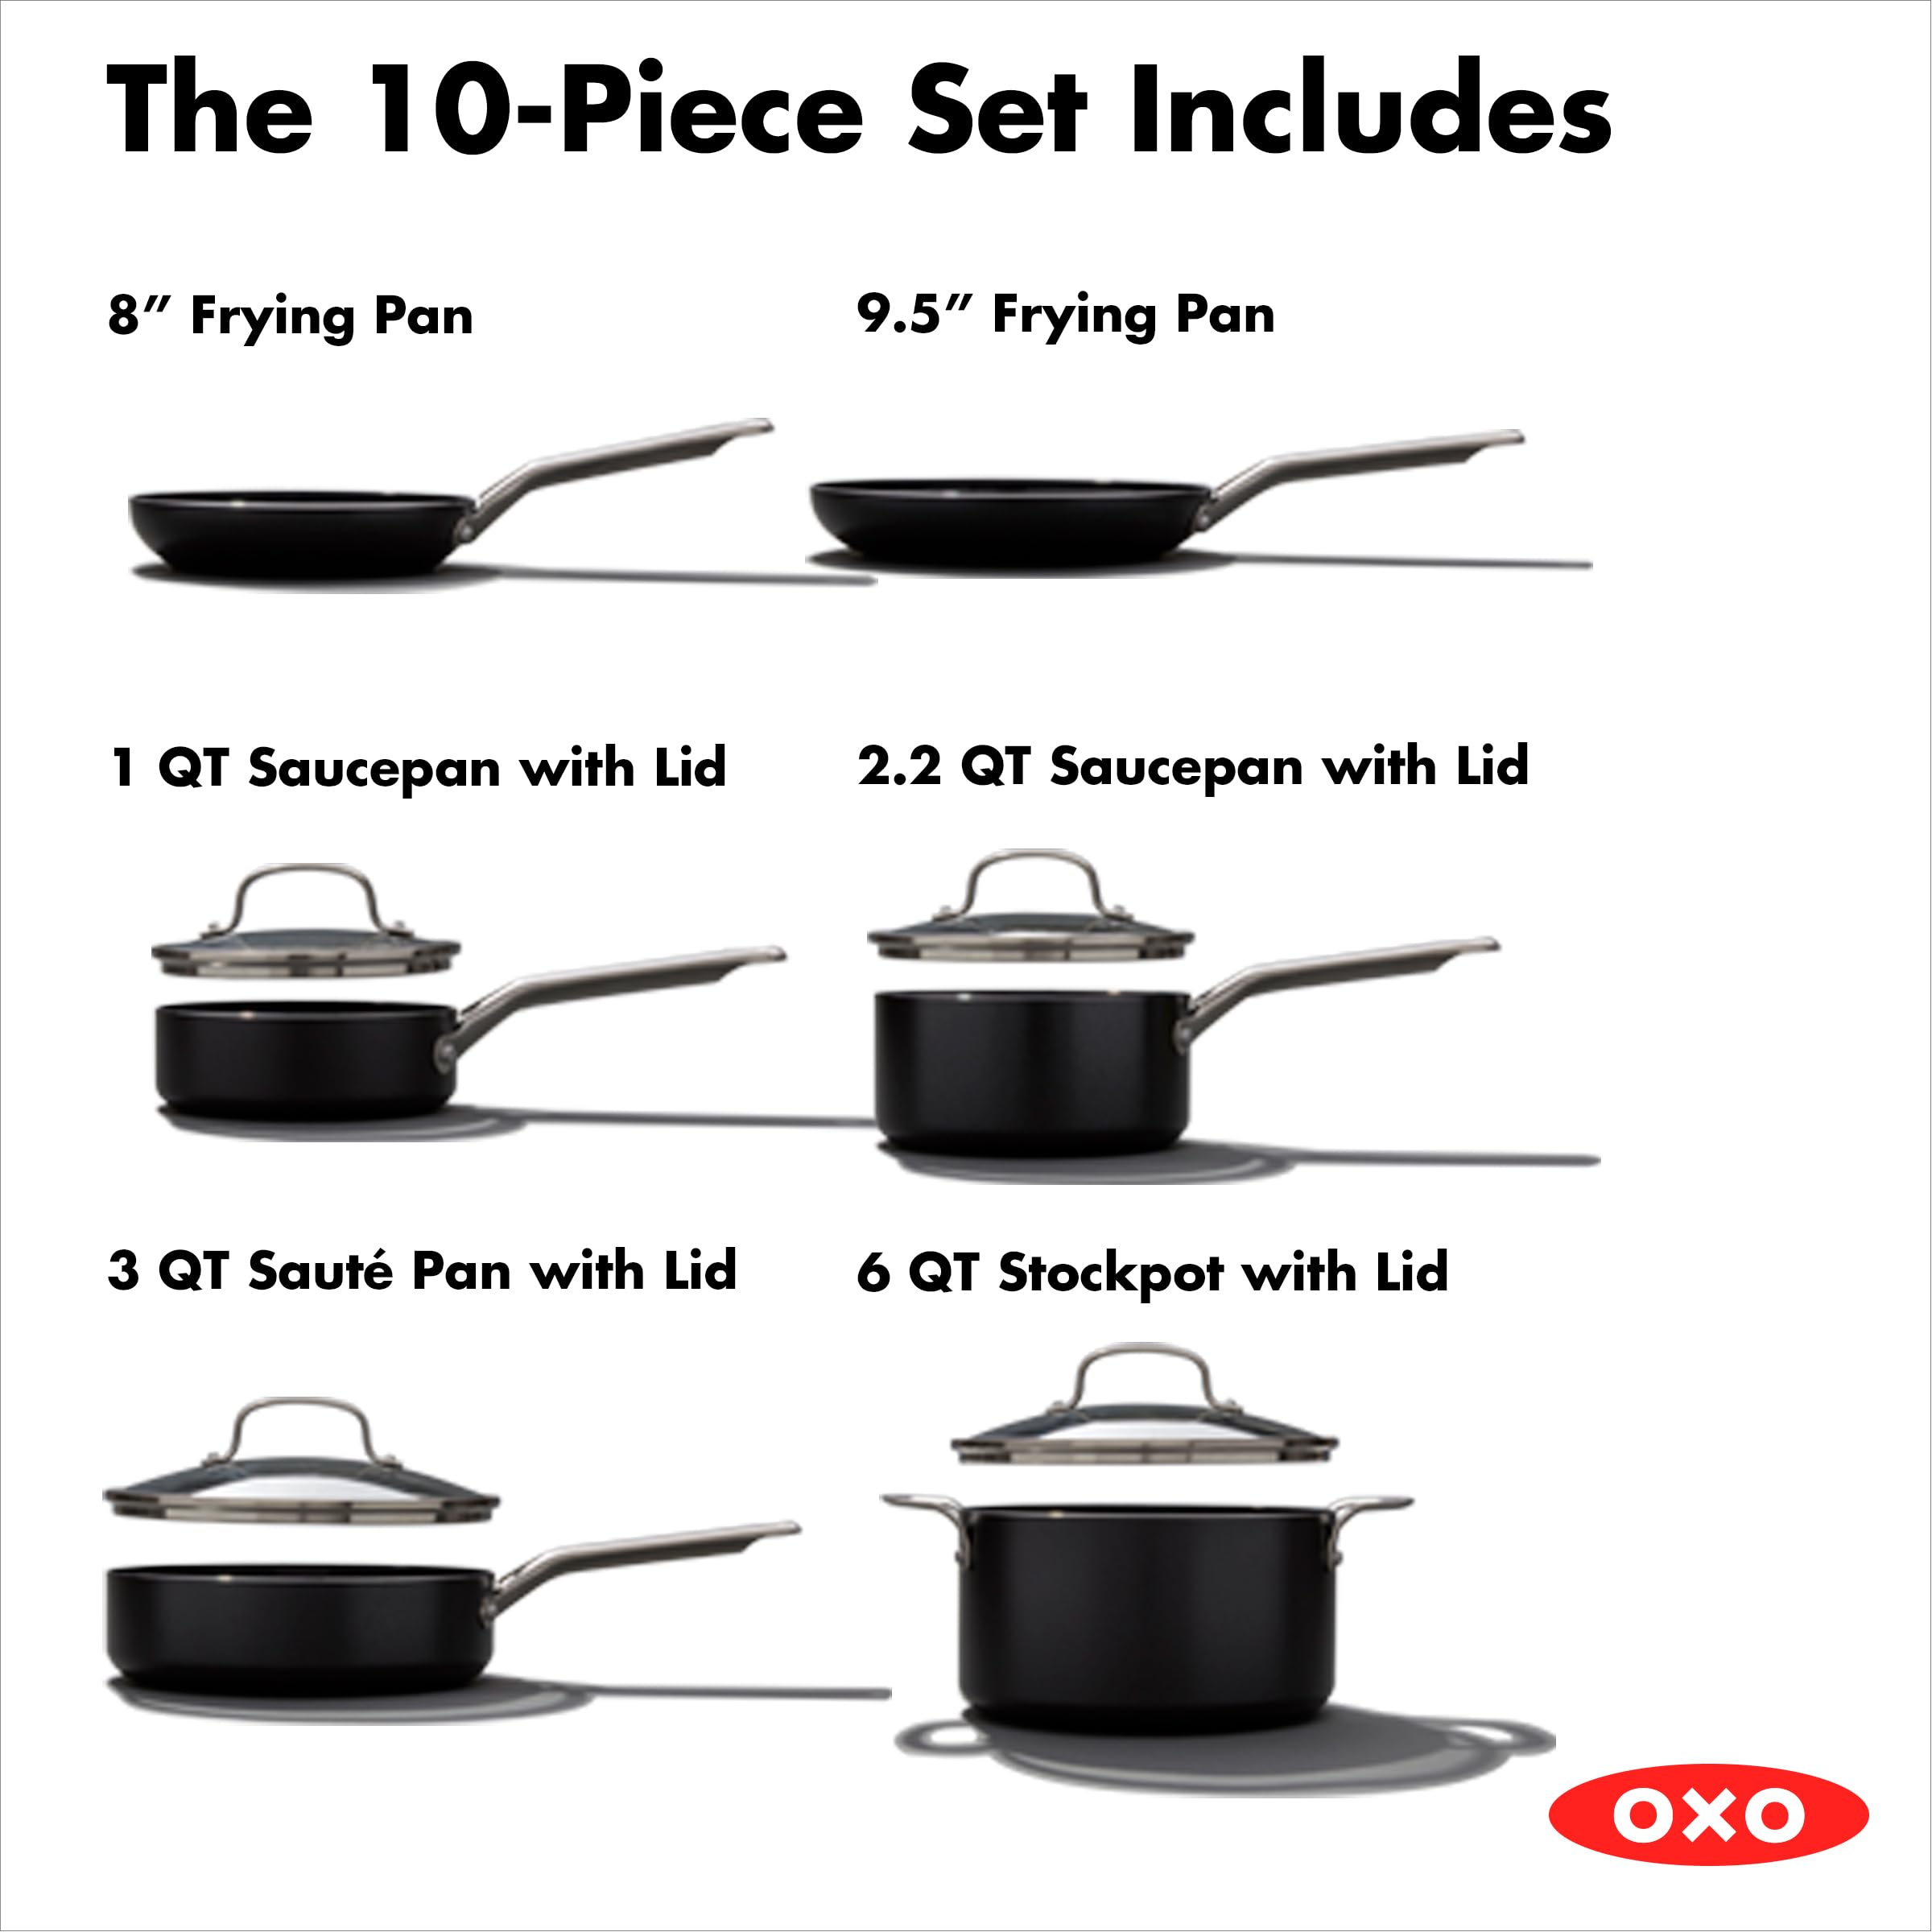 OXO Agility Series 10 Piece Cookware Pots & Pans Set, PFAS-Free Nonstick, Induction Suitable, Quick Even Heating, Stainless Steel Handles, Chip-Free Rims, Dishwasher & Oven Safe Pots and Pans, Black